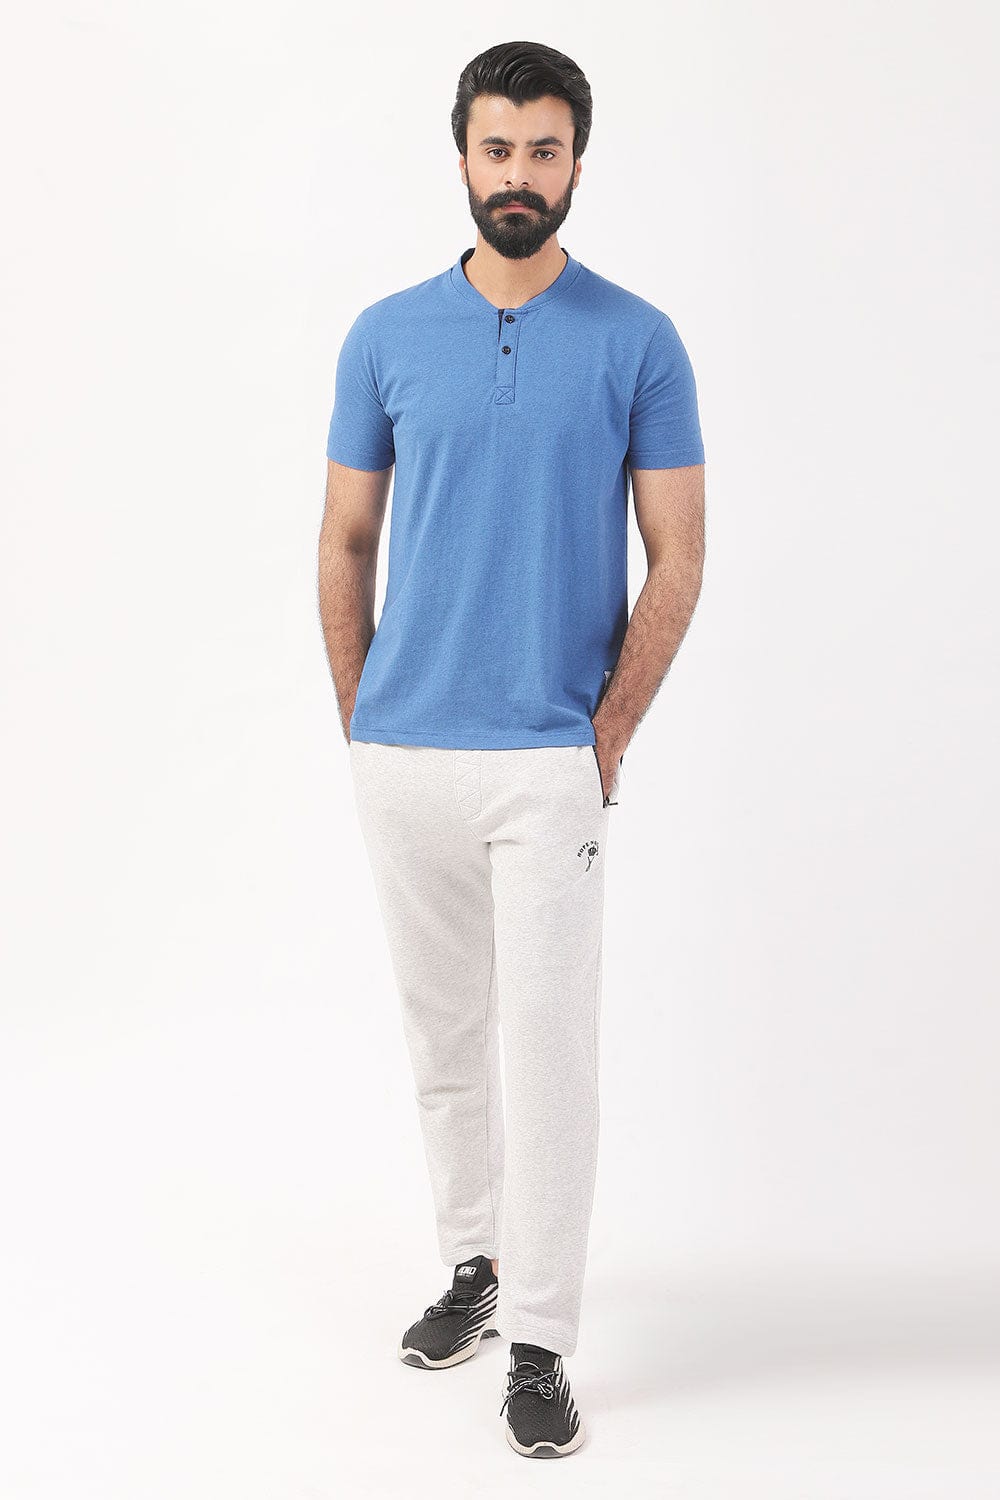 Hope Not Out by Shahid Afridi Men T-Shirt Fashion Henley with Contrast Placket